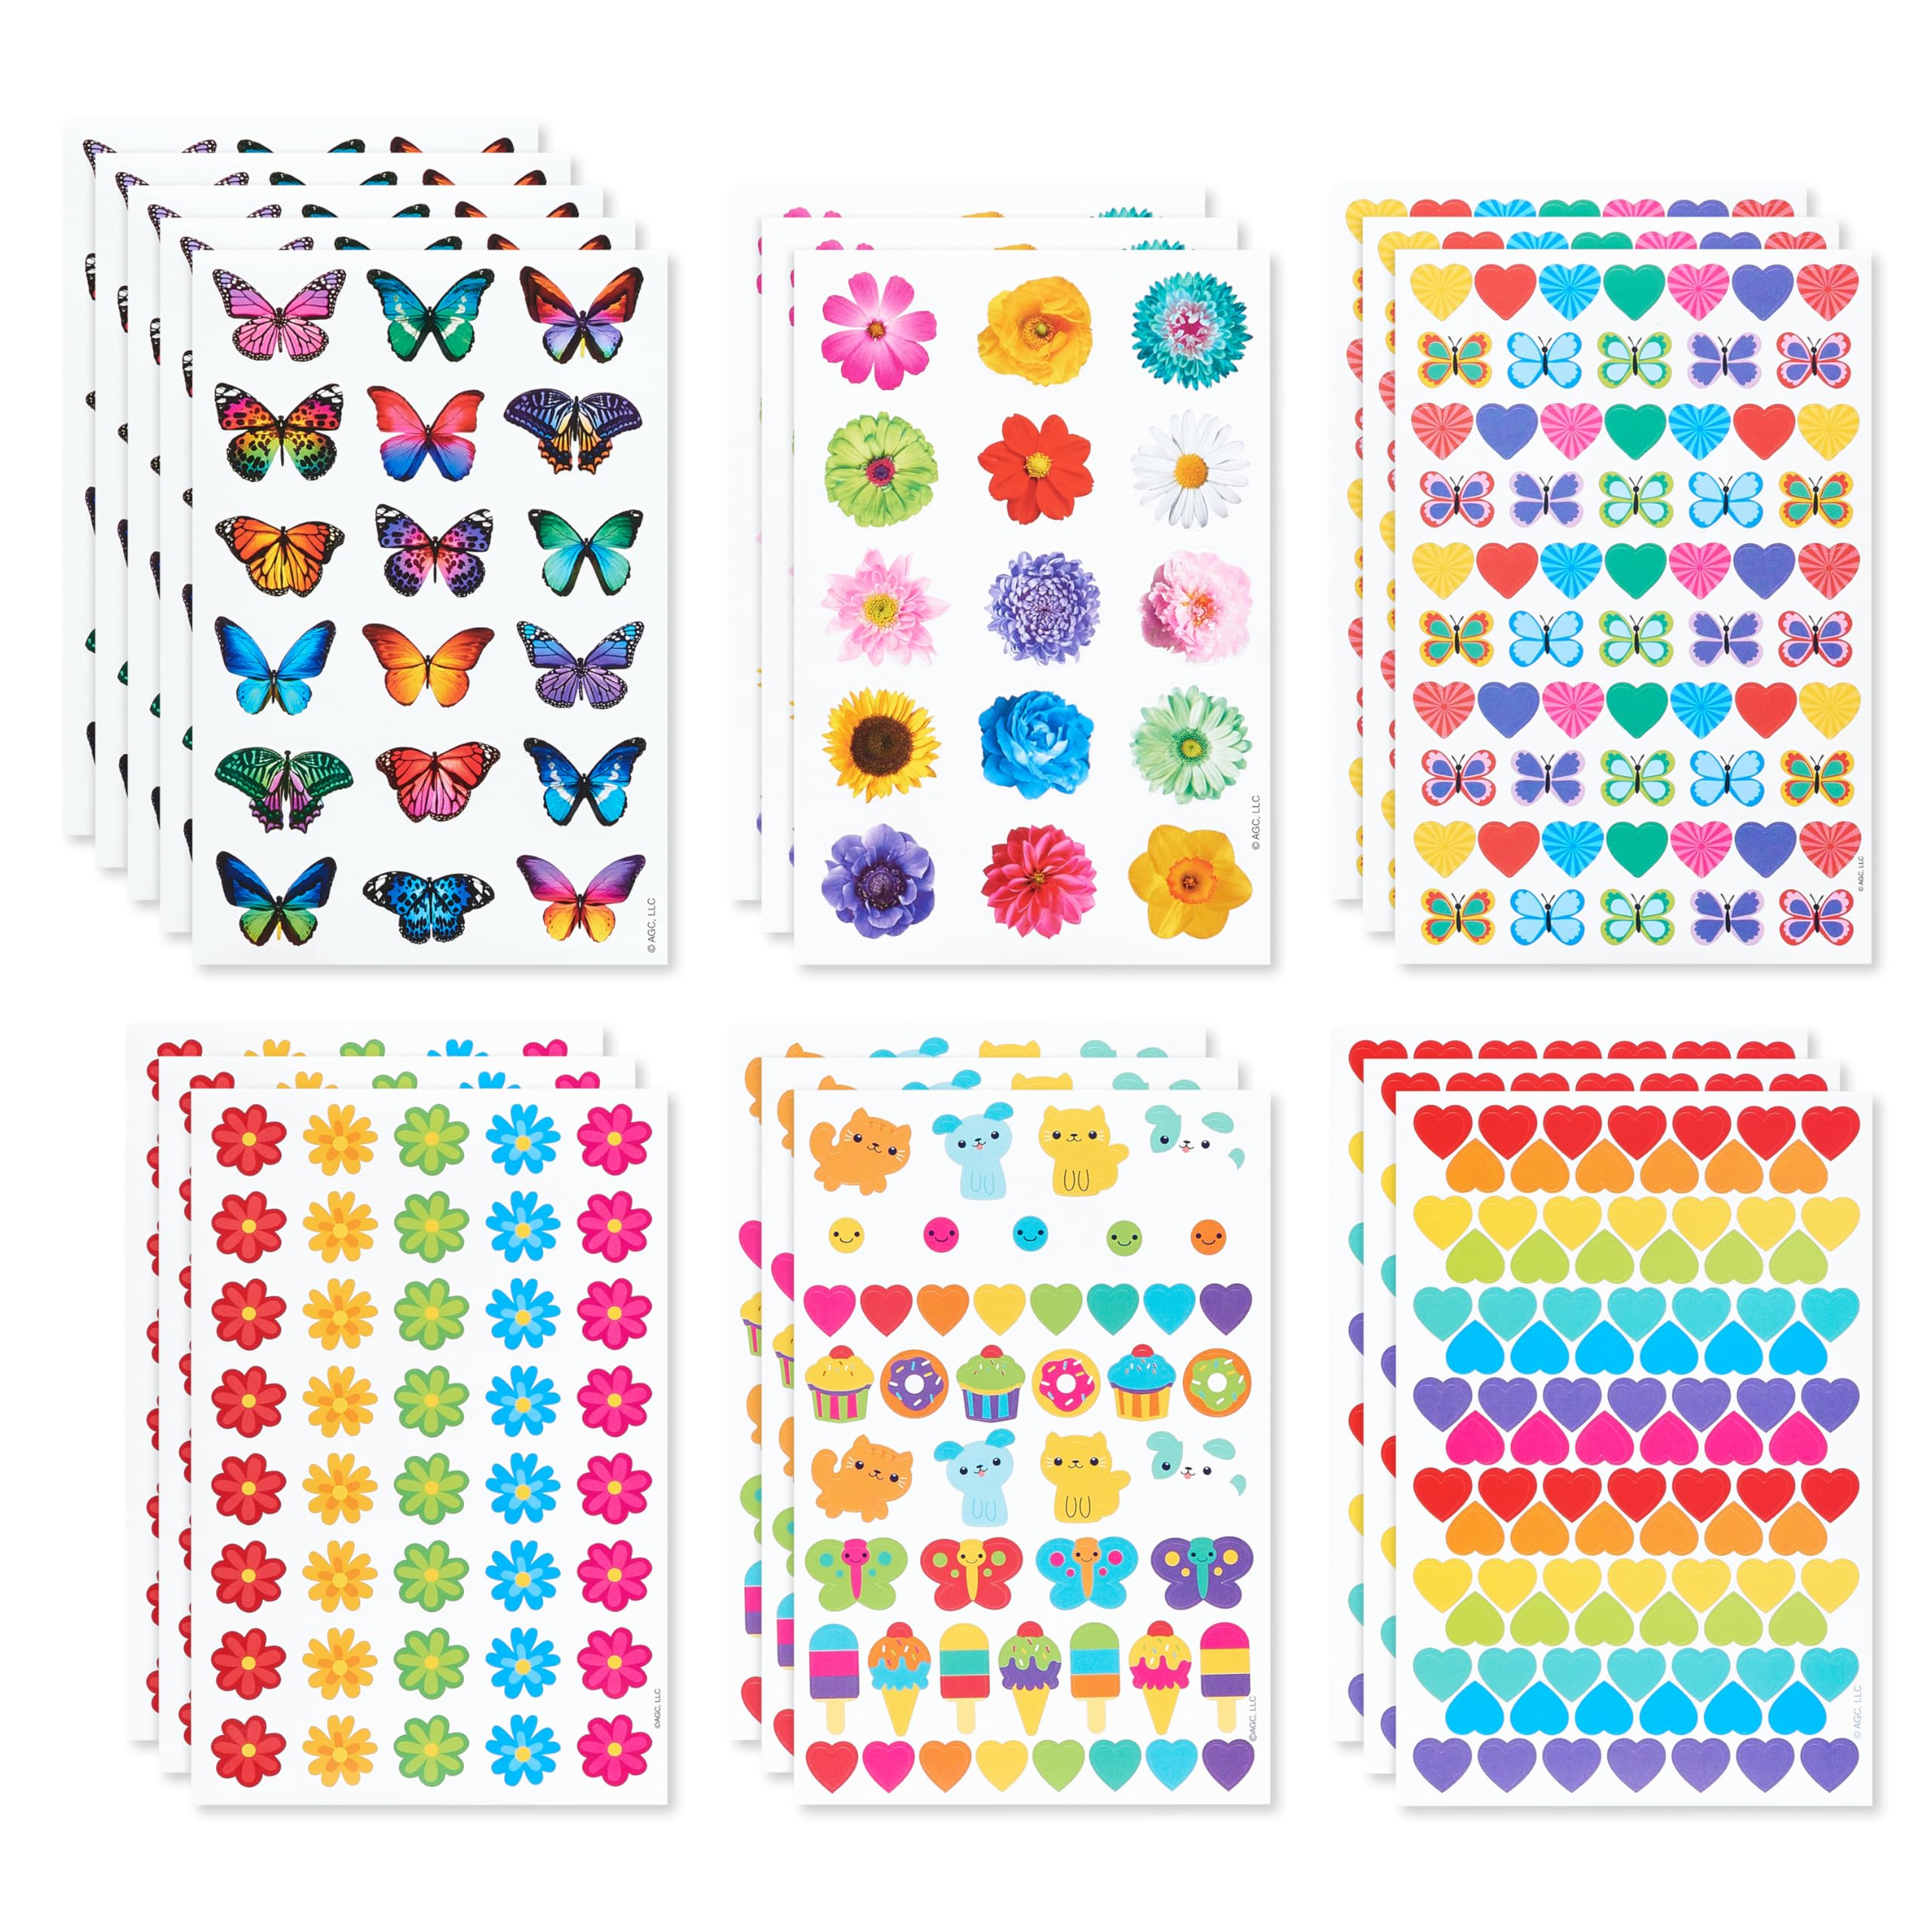 American Greetings 867-Count Bulk Stickers for Kids, Butterflies and Flowers